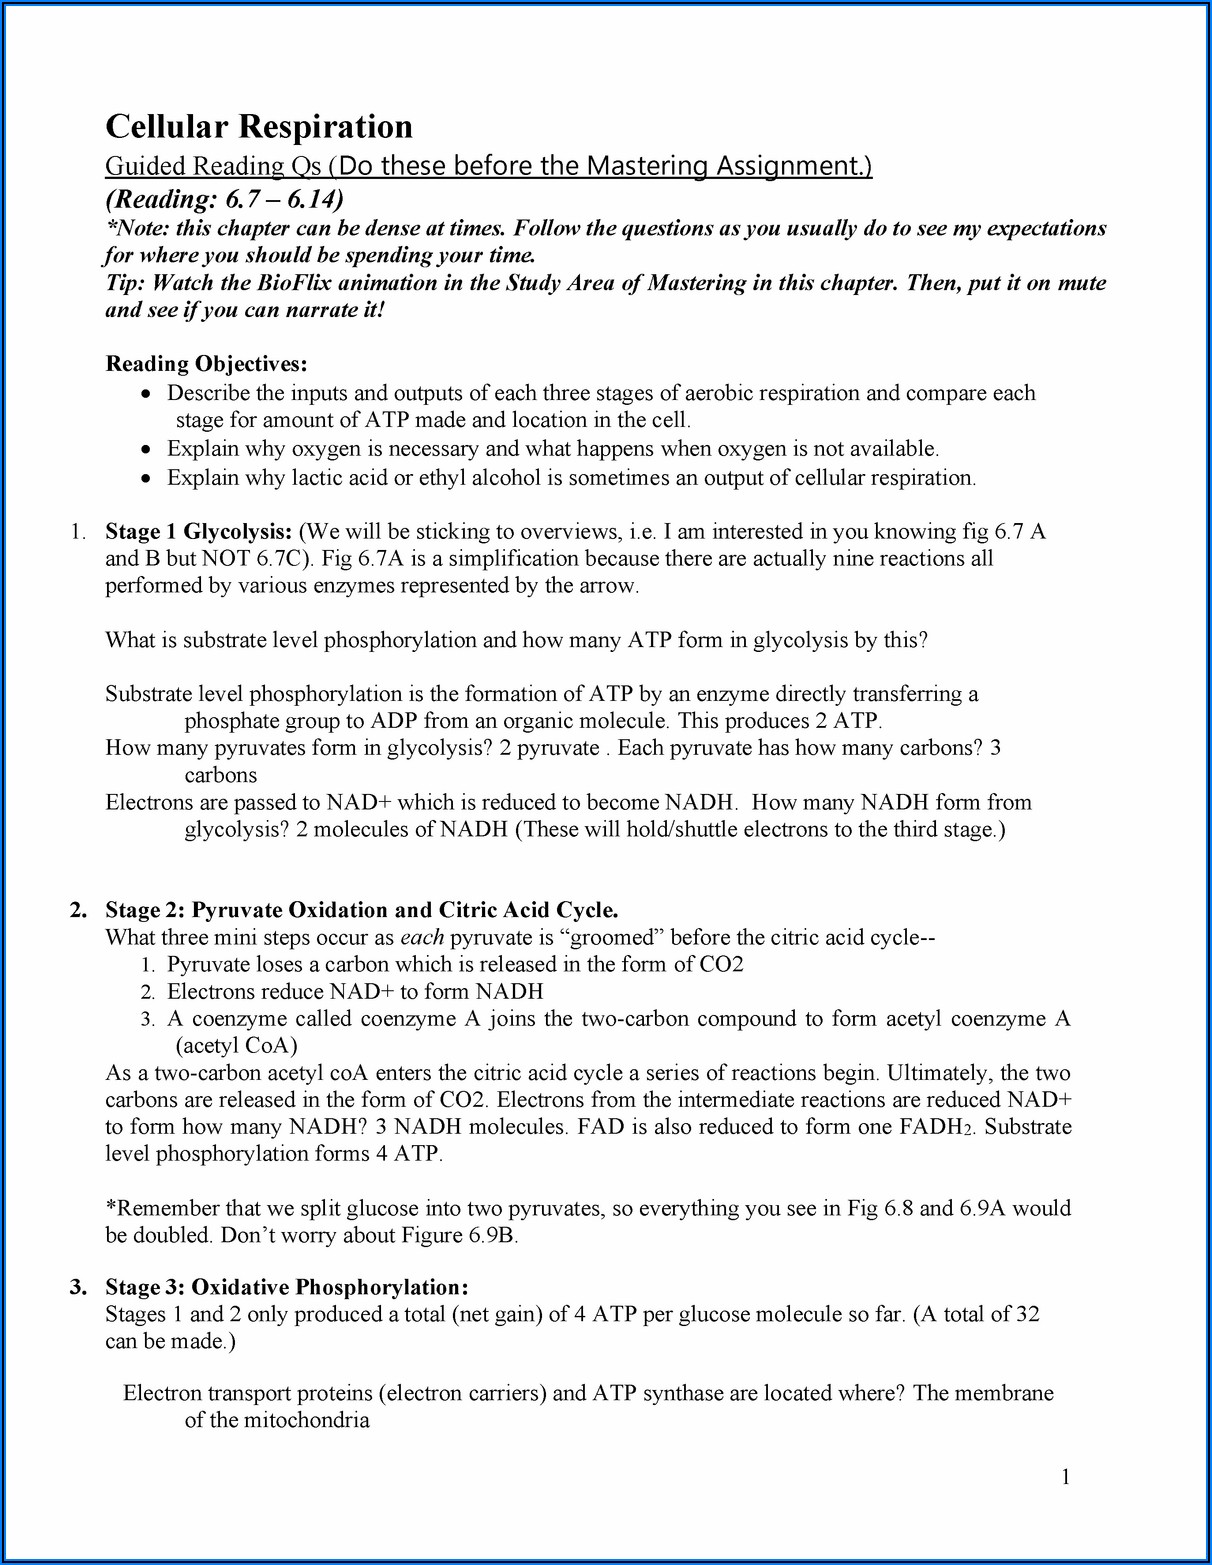 Skills Worksheet Active Reading Cellular Respiration Answers